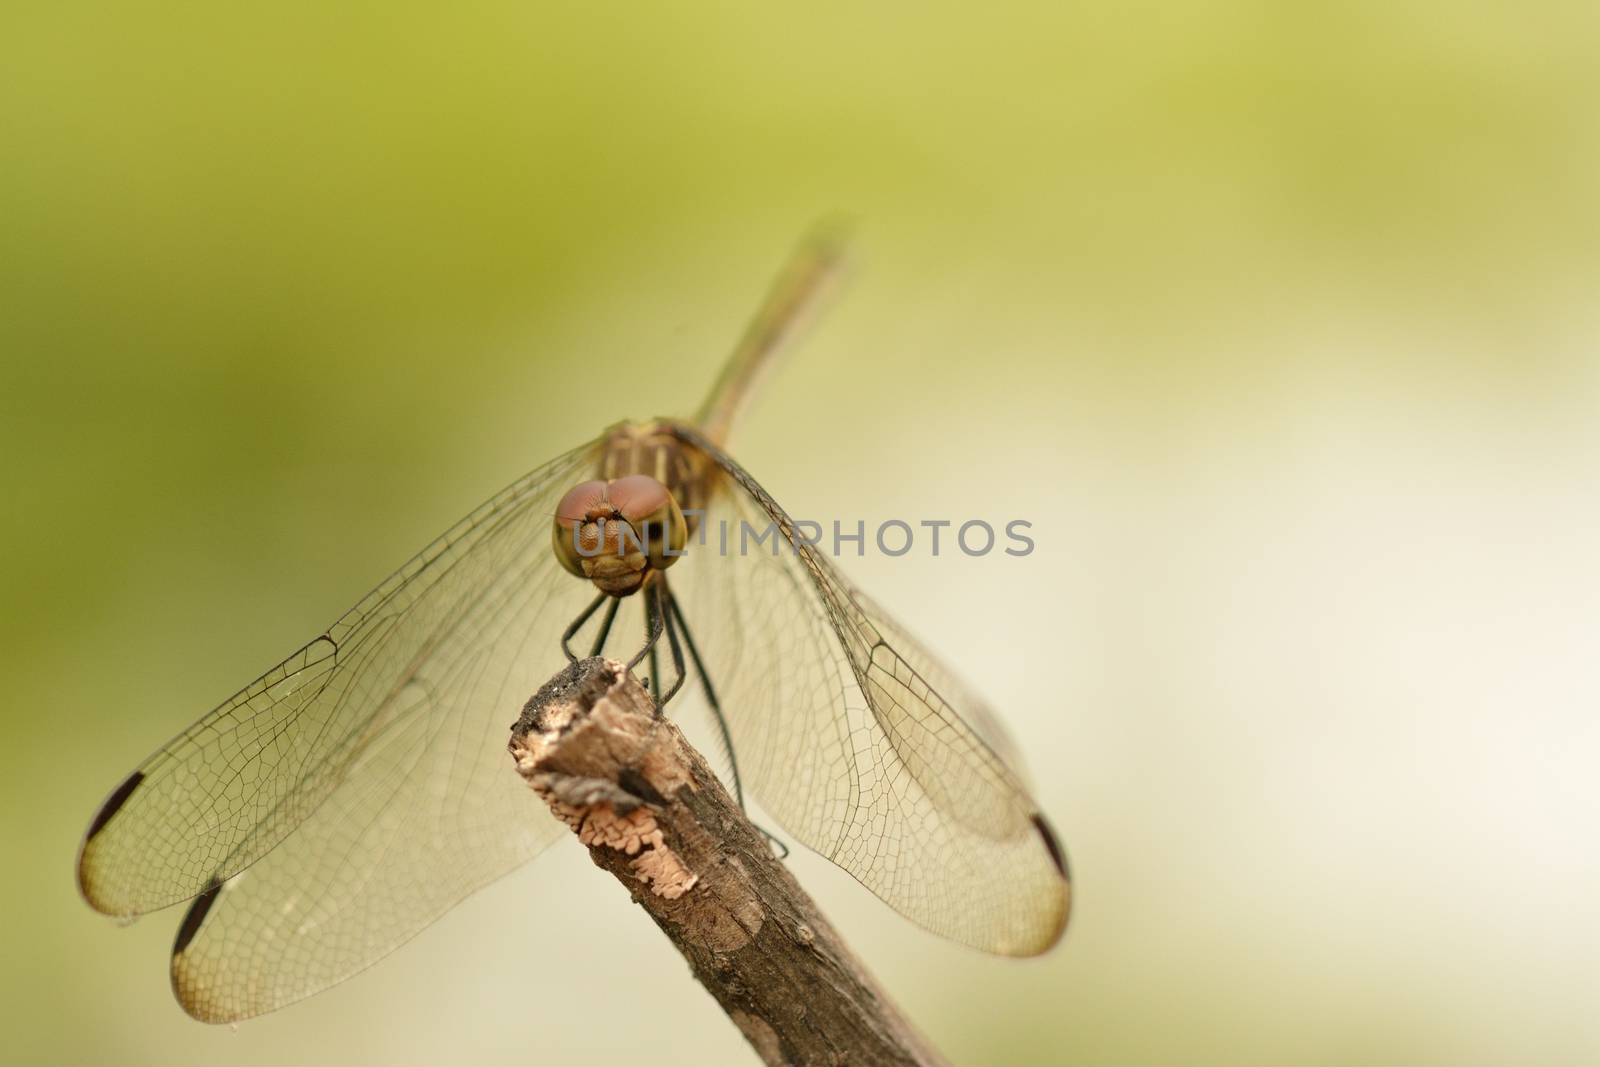 A beautiful dragonfly resting on a brach with a green background